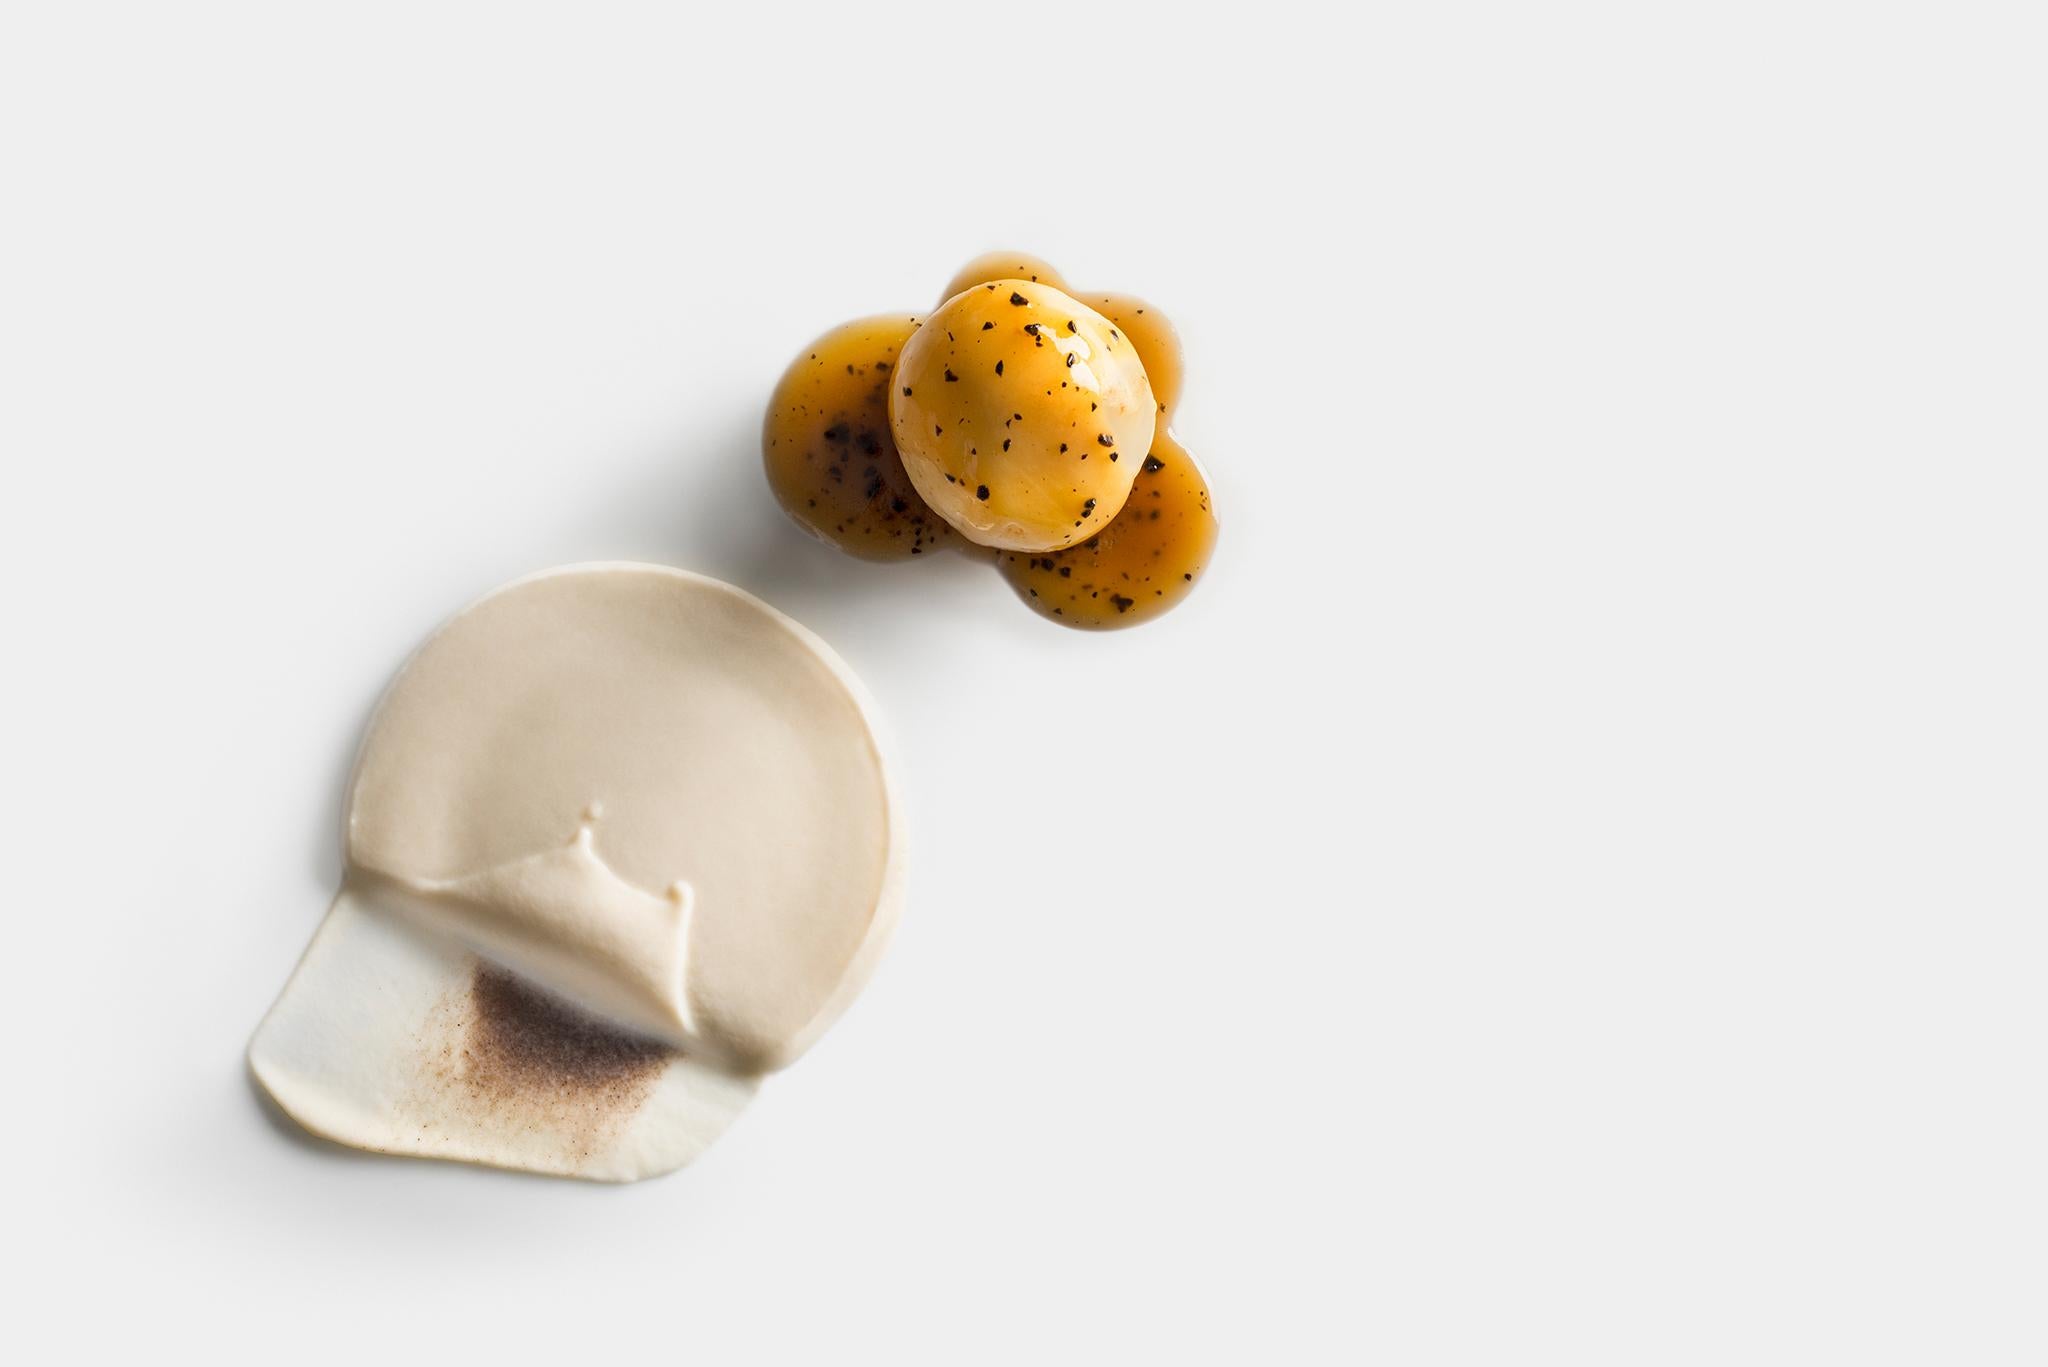 Celery root cooked in a pig’s bladder served at Eleven Madison Park, New York